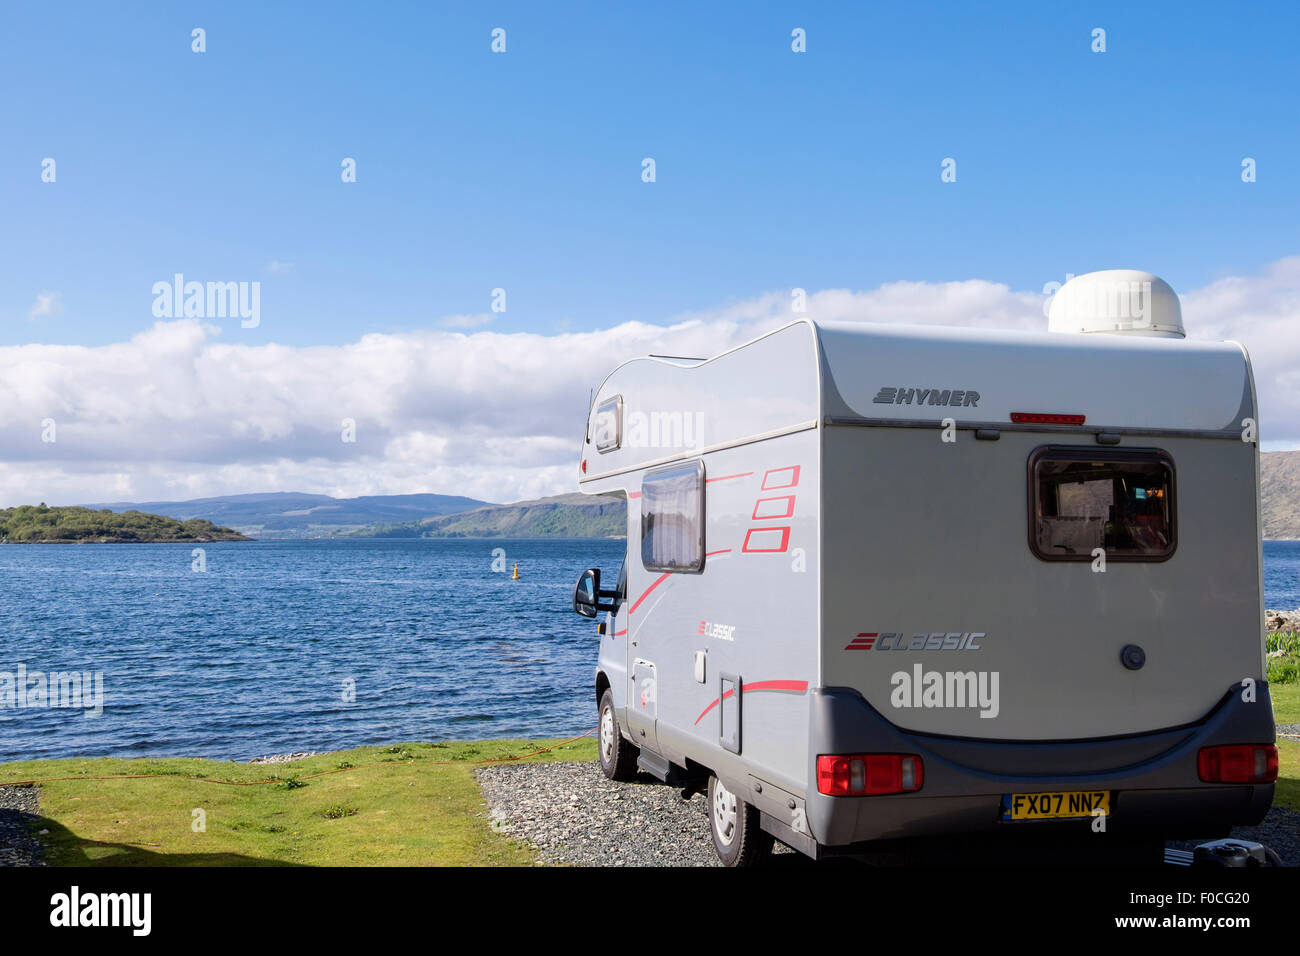 Hymer Motorhome in campsite overlooking bay and Sound of Mull. Craignure Isle of Mull Inner Hebrides Western Isles Scotland UK Stock Photo